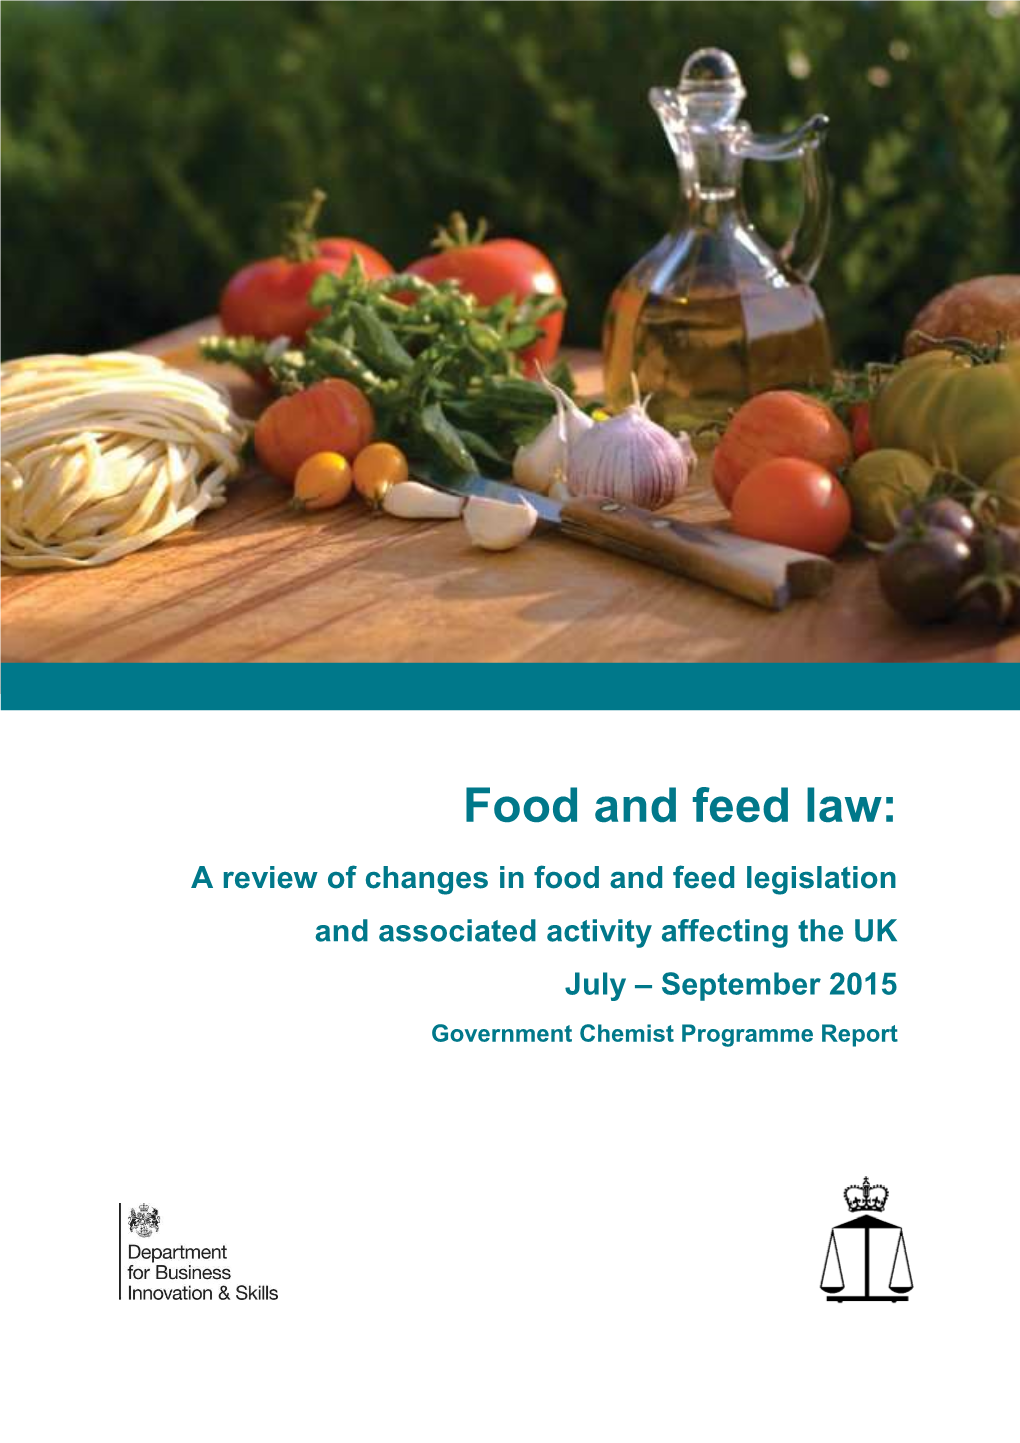 Food and Feed Law Legislation Review